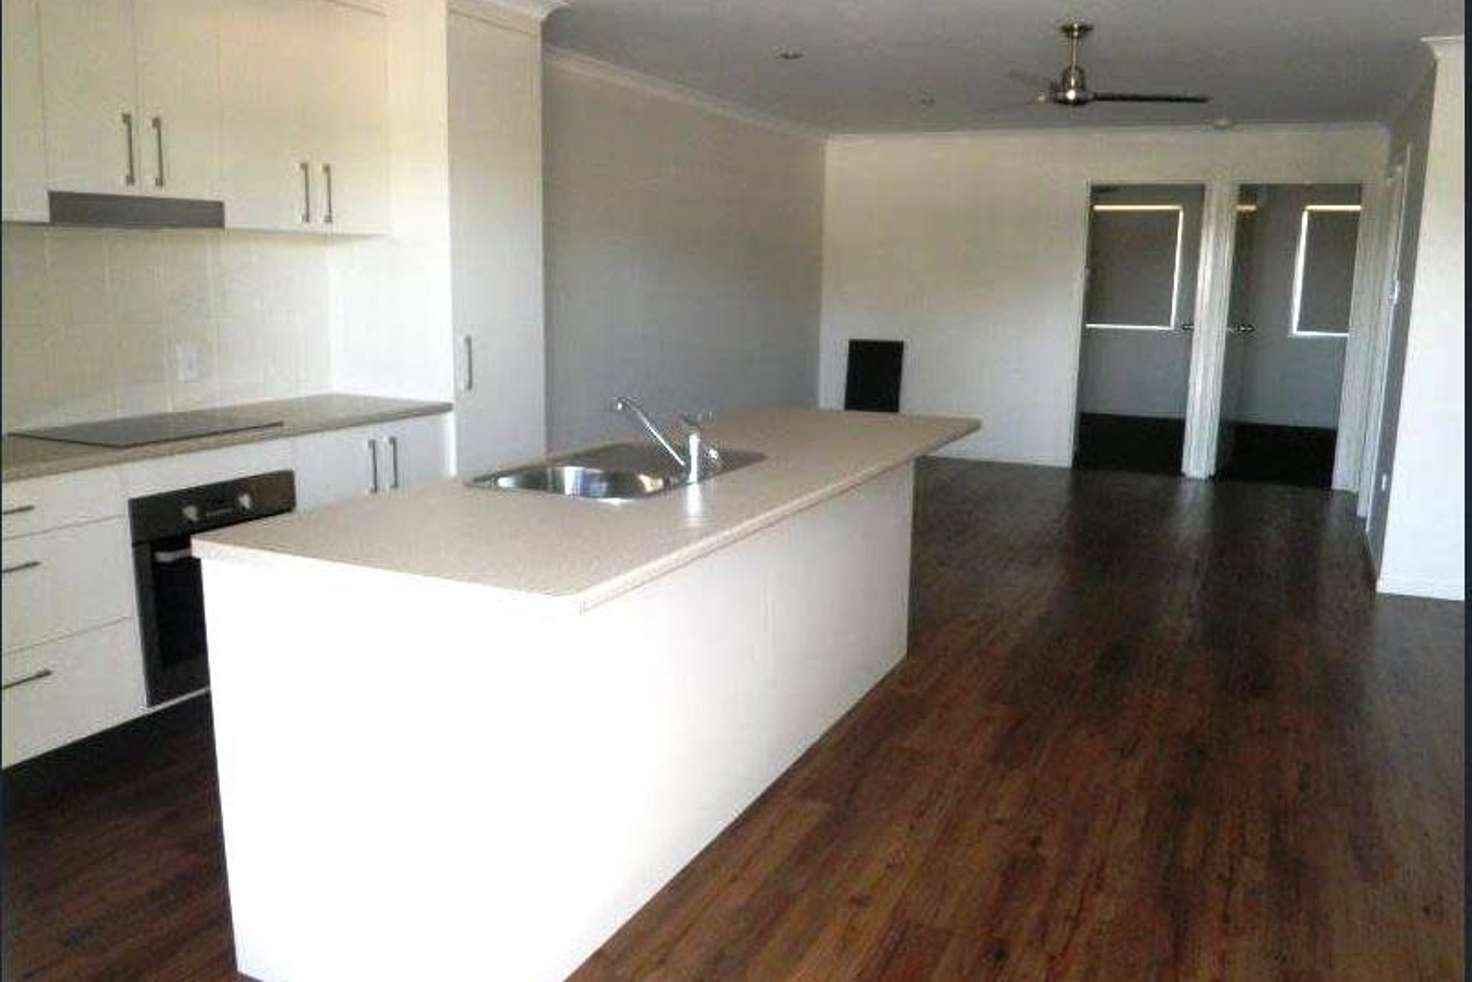 Main view of Homely townhouse listing, 7/17 Sandalwood St, Blackwater QLD 4717